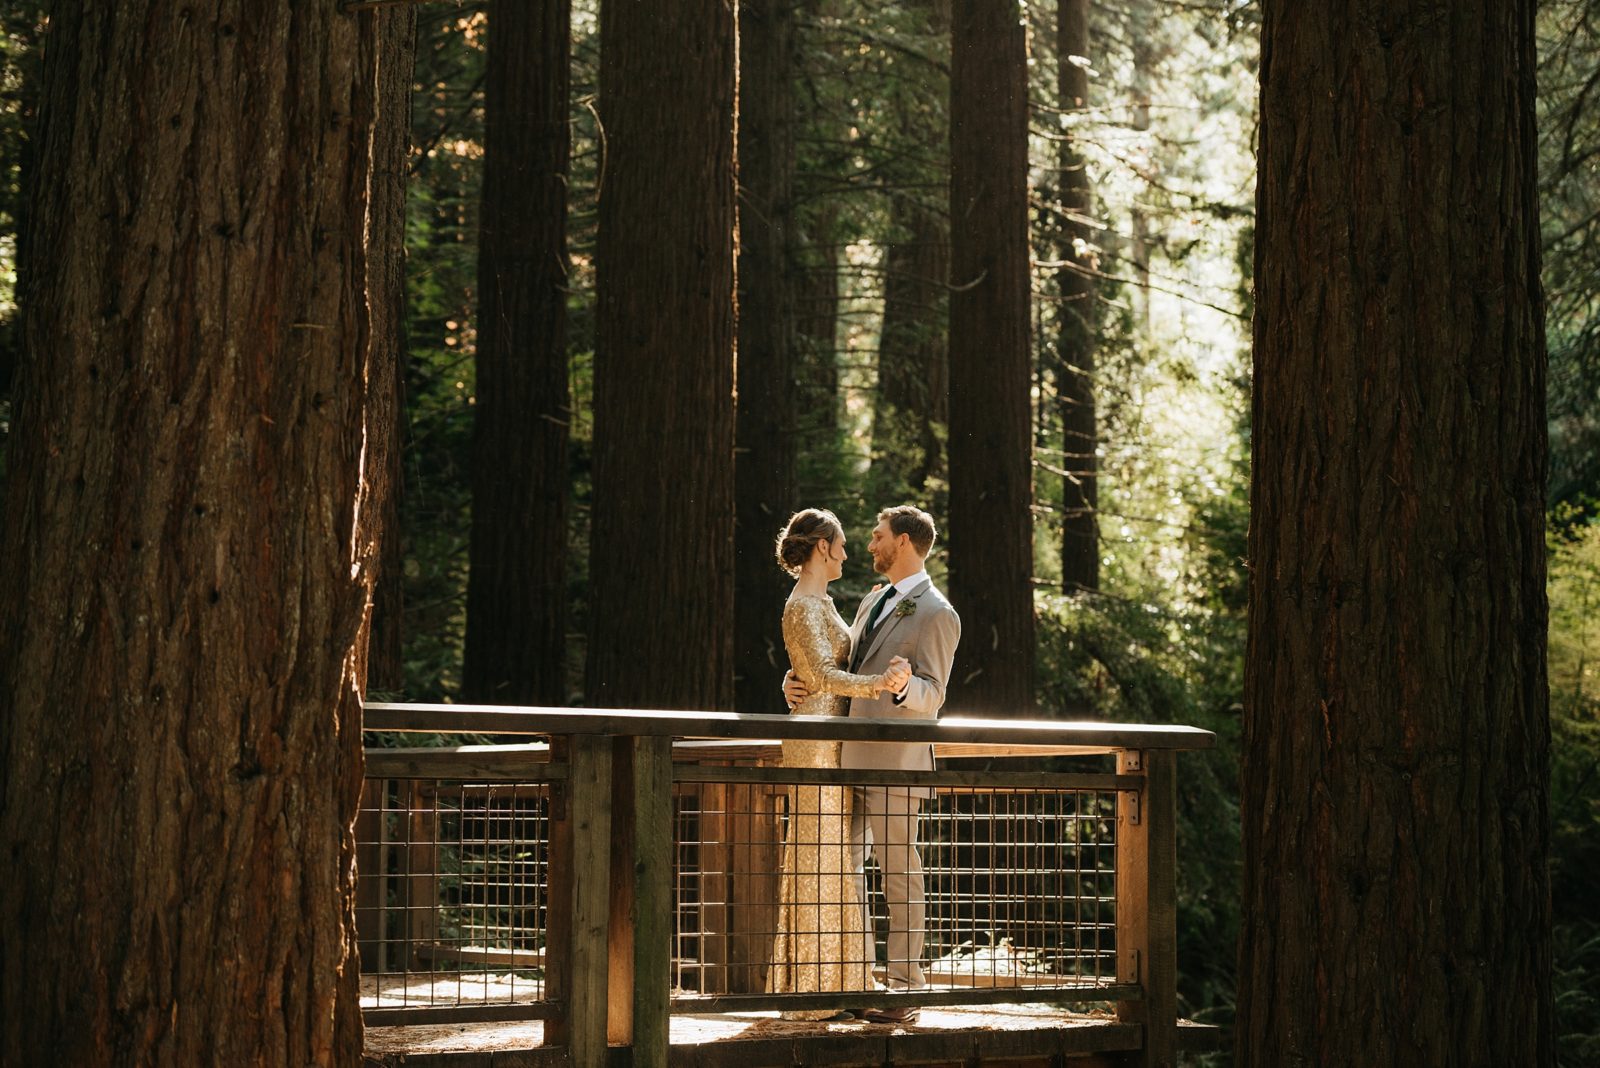 Couple dancing on the redwood deck of Hoyt Arboretum after eloping.